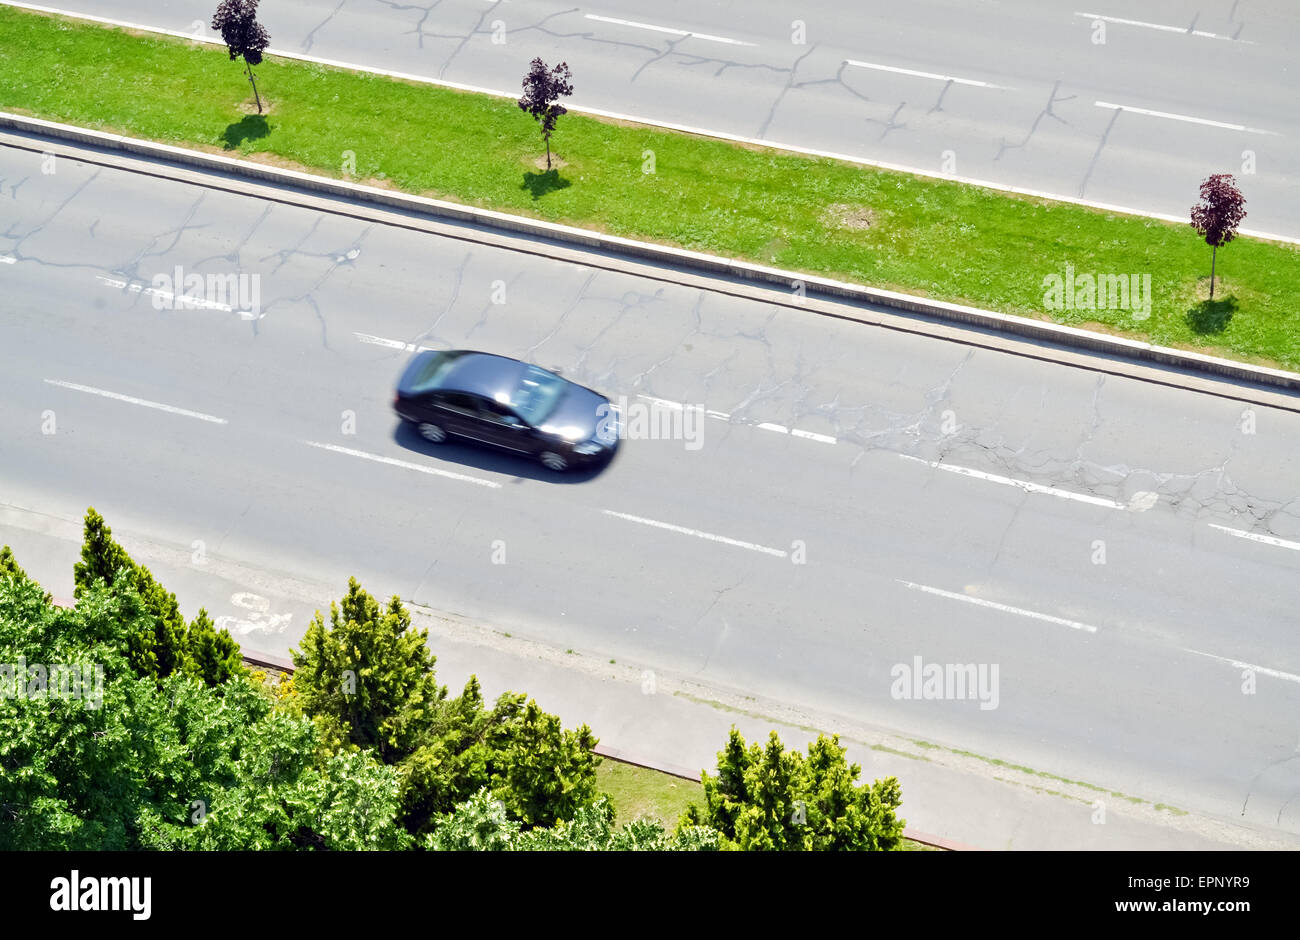 Blurred black car in motion on the city boulevard Stock Photo